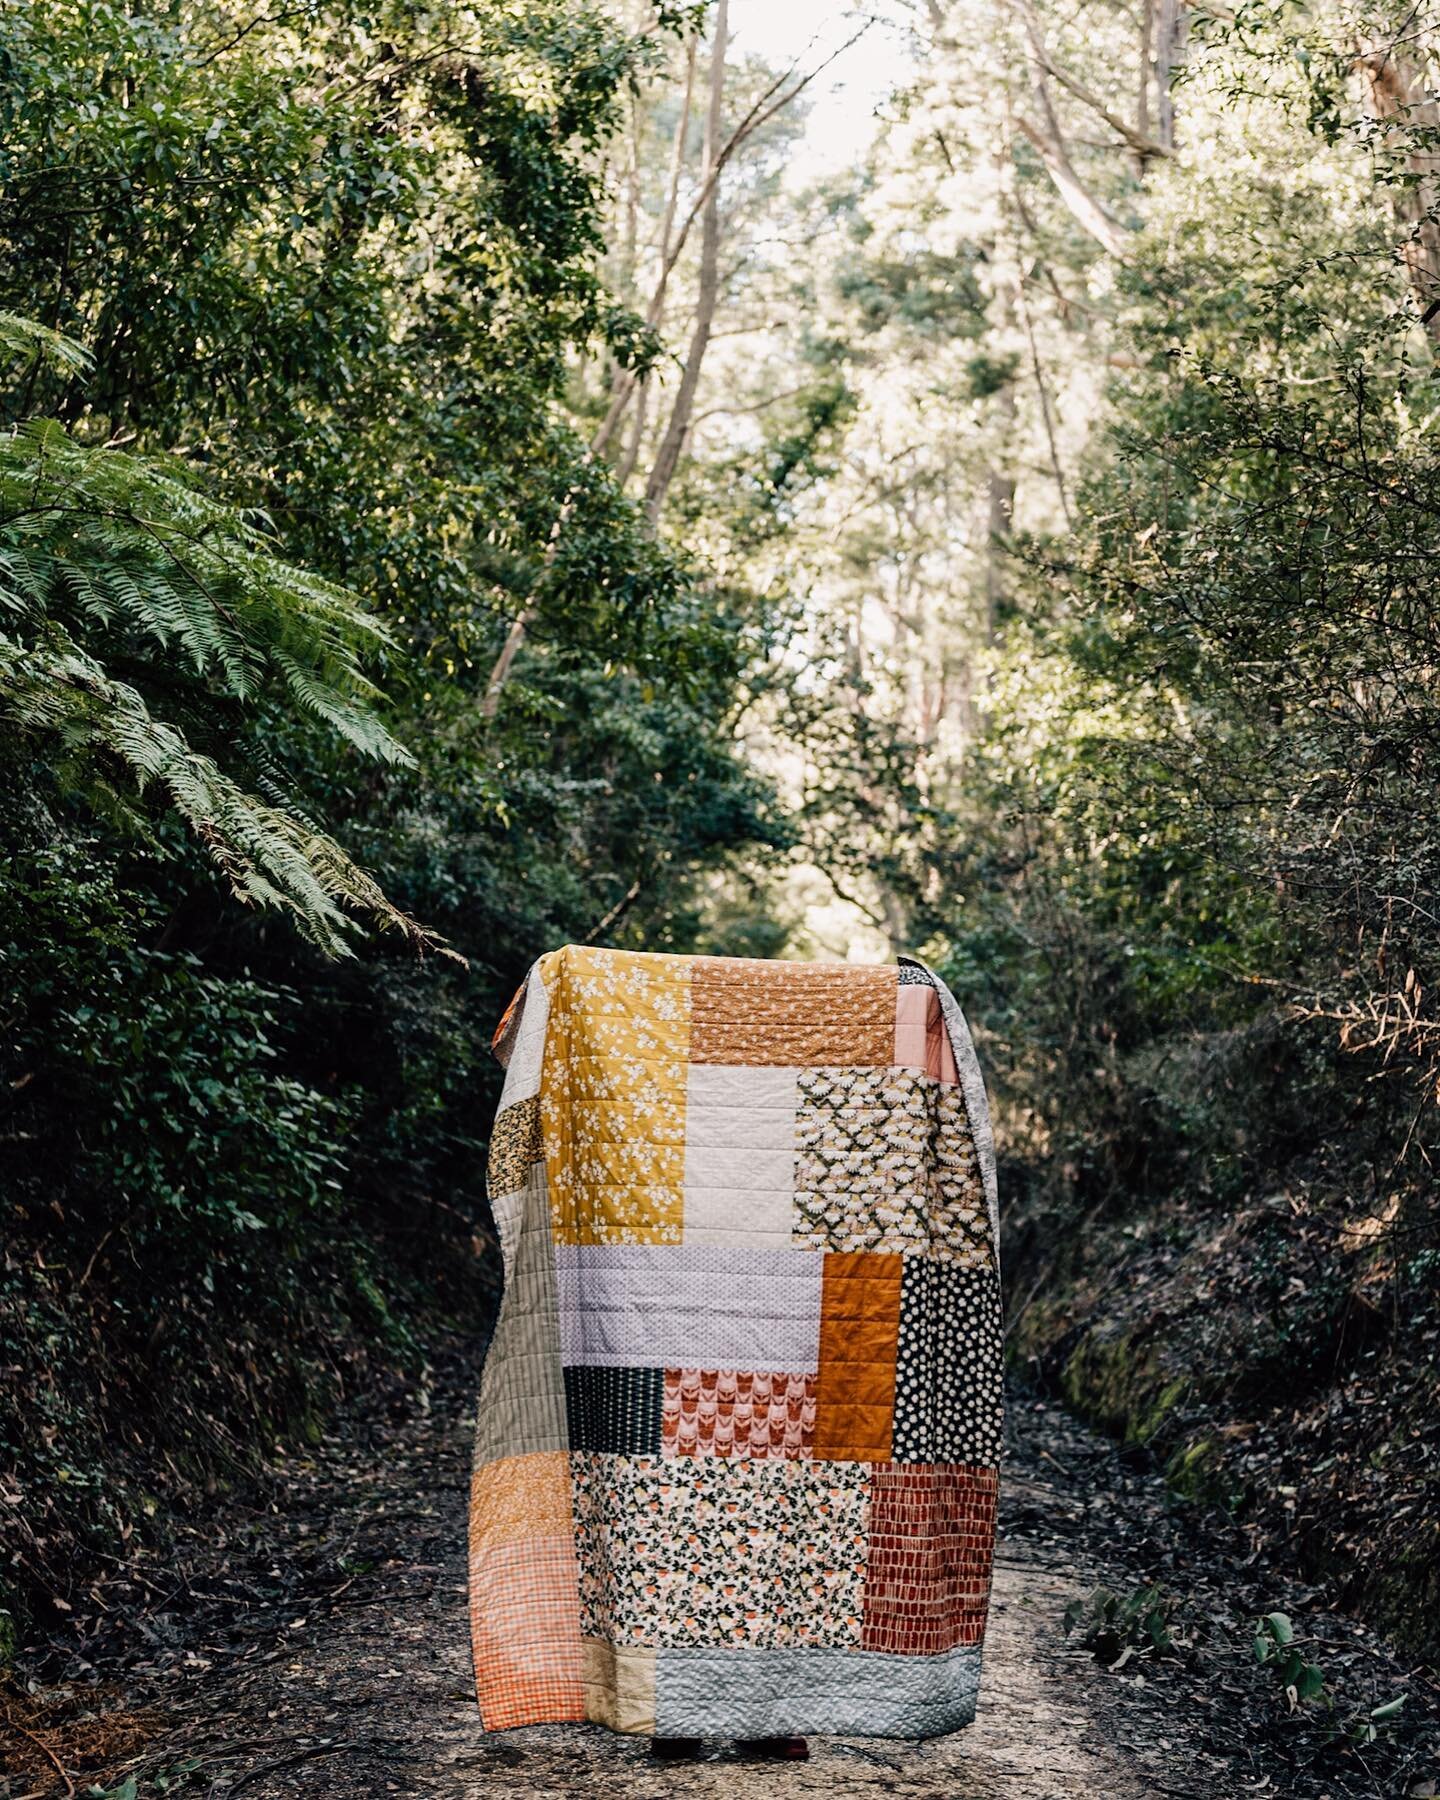 Recent work for @amykallissa ❤️

If you head over to @the_everydaymakers we are giving away the pattern to this gorgeous quilt.
Lockdown project perhaps?